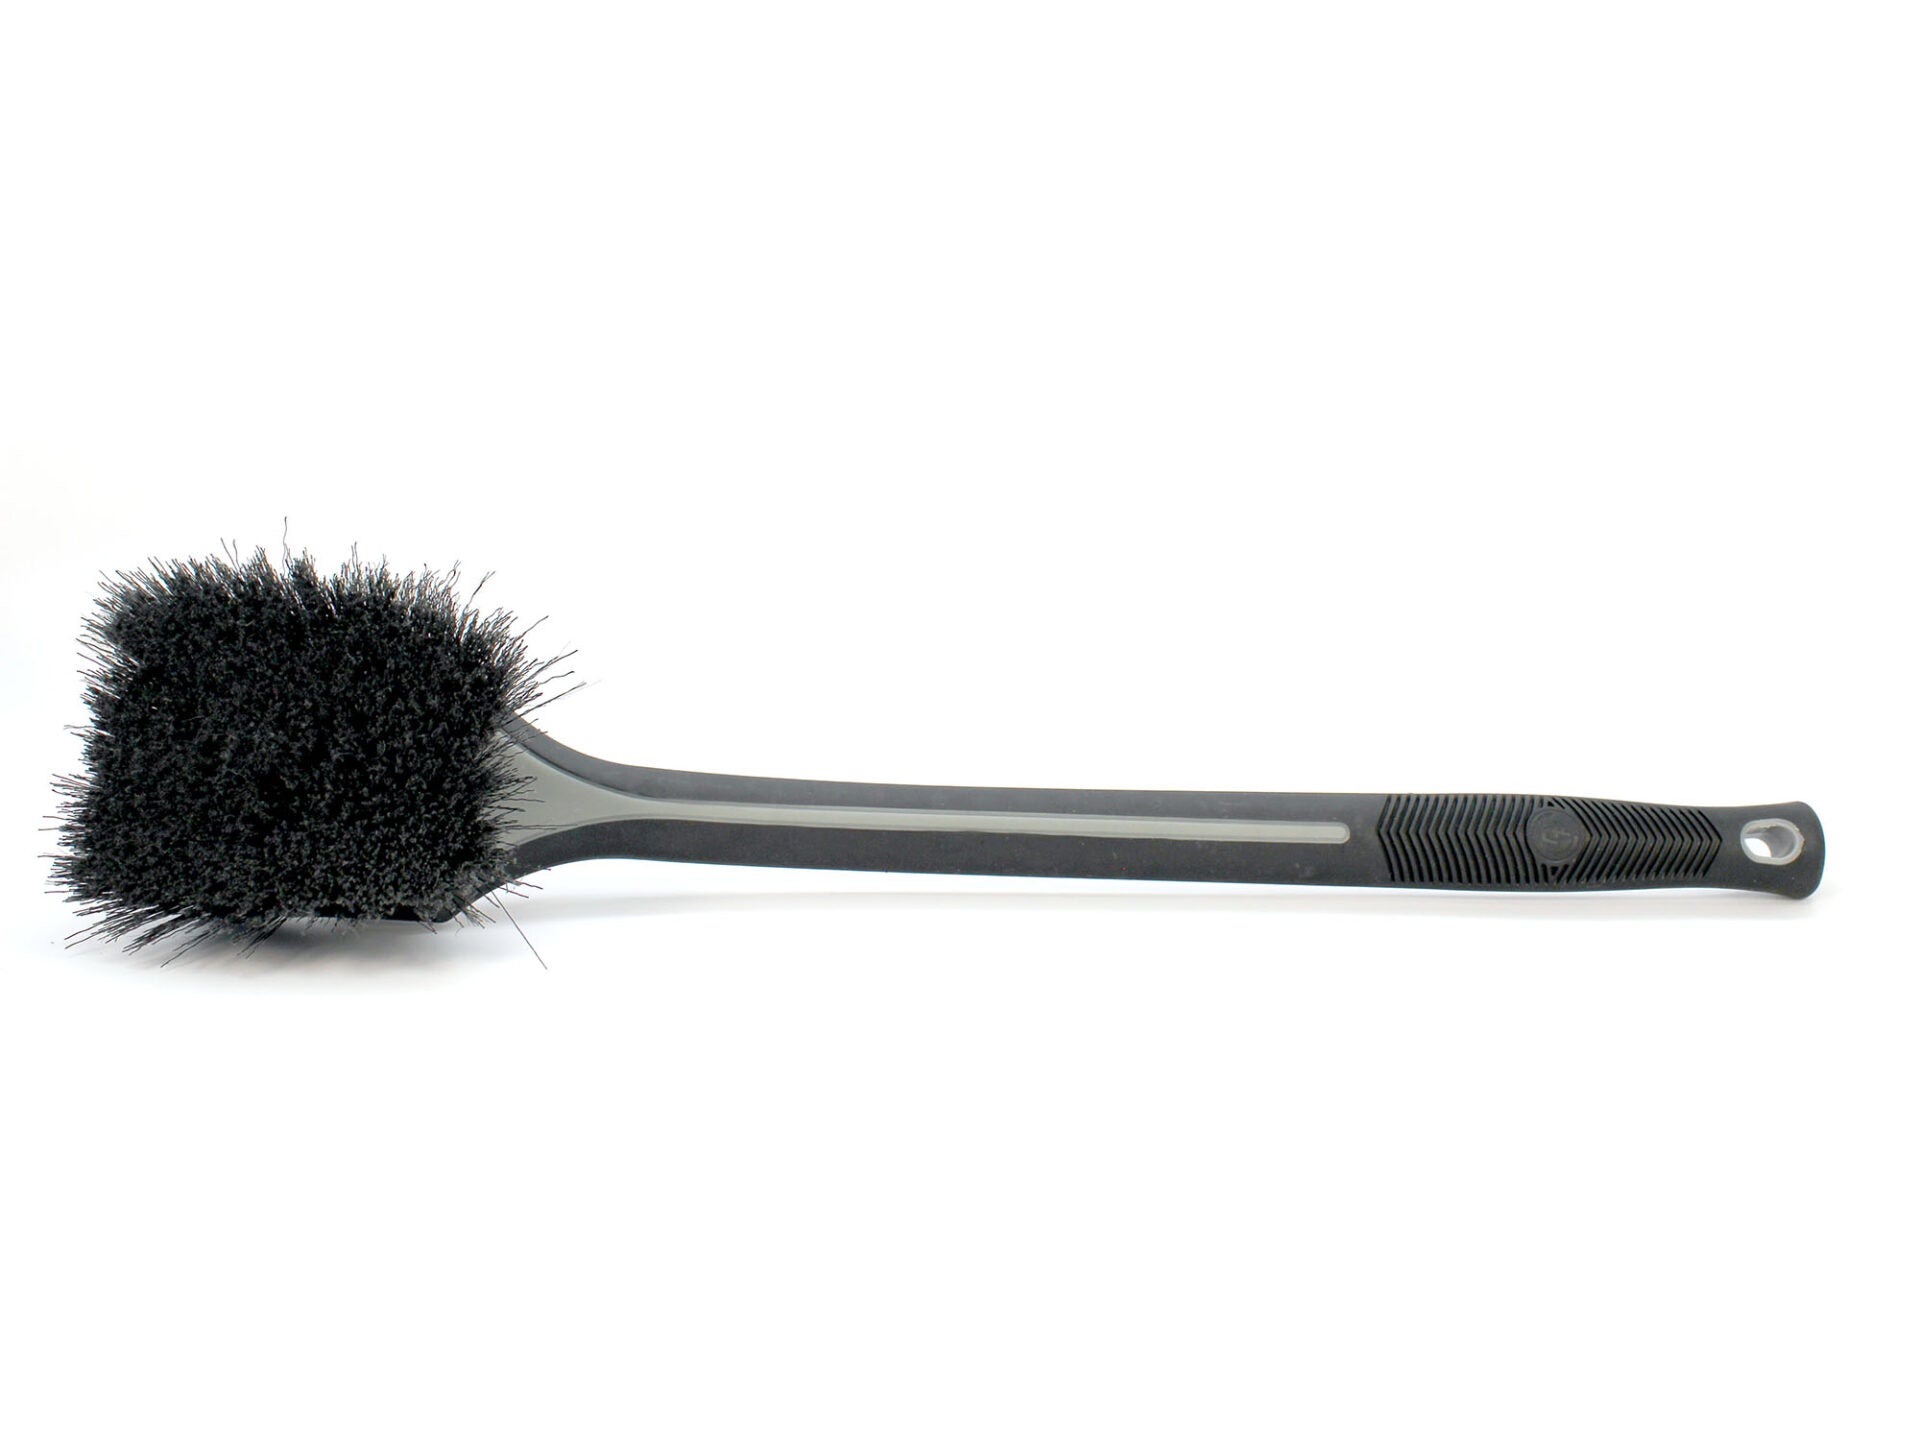 The Best Interior Detailing Brushes - 6.5 Inch Detail Factory